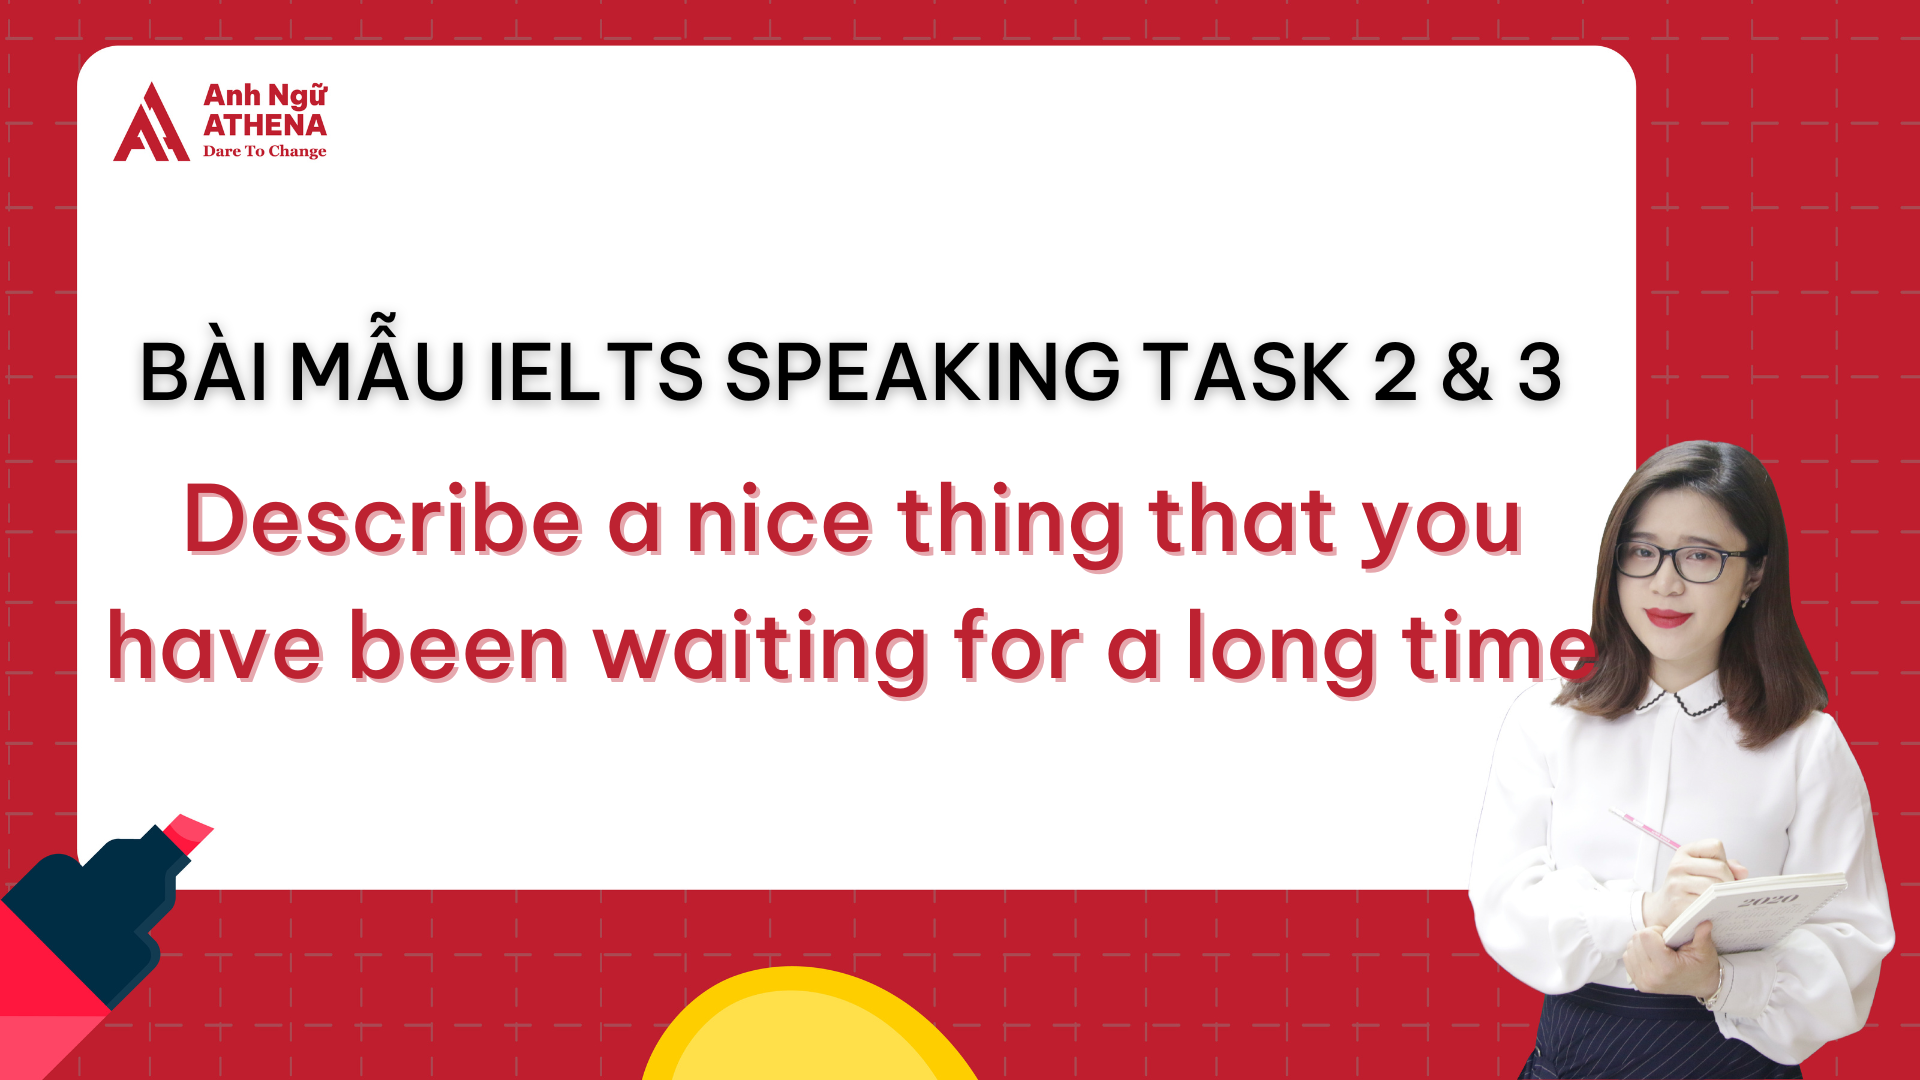 Bài mẫu IELTS Speaking Part 2 & 3 - Topic: Describe a nice thing that you have been waiting for a long time